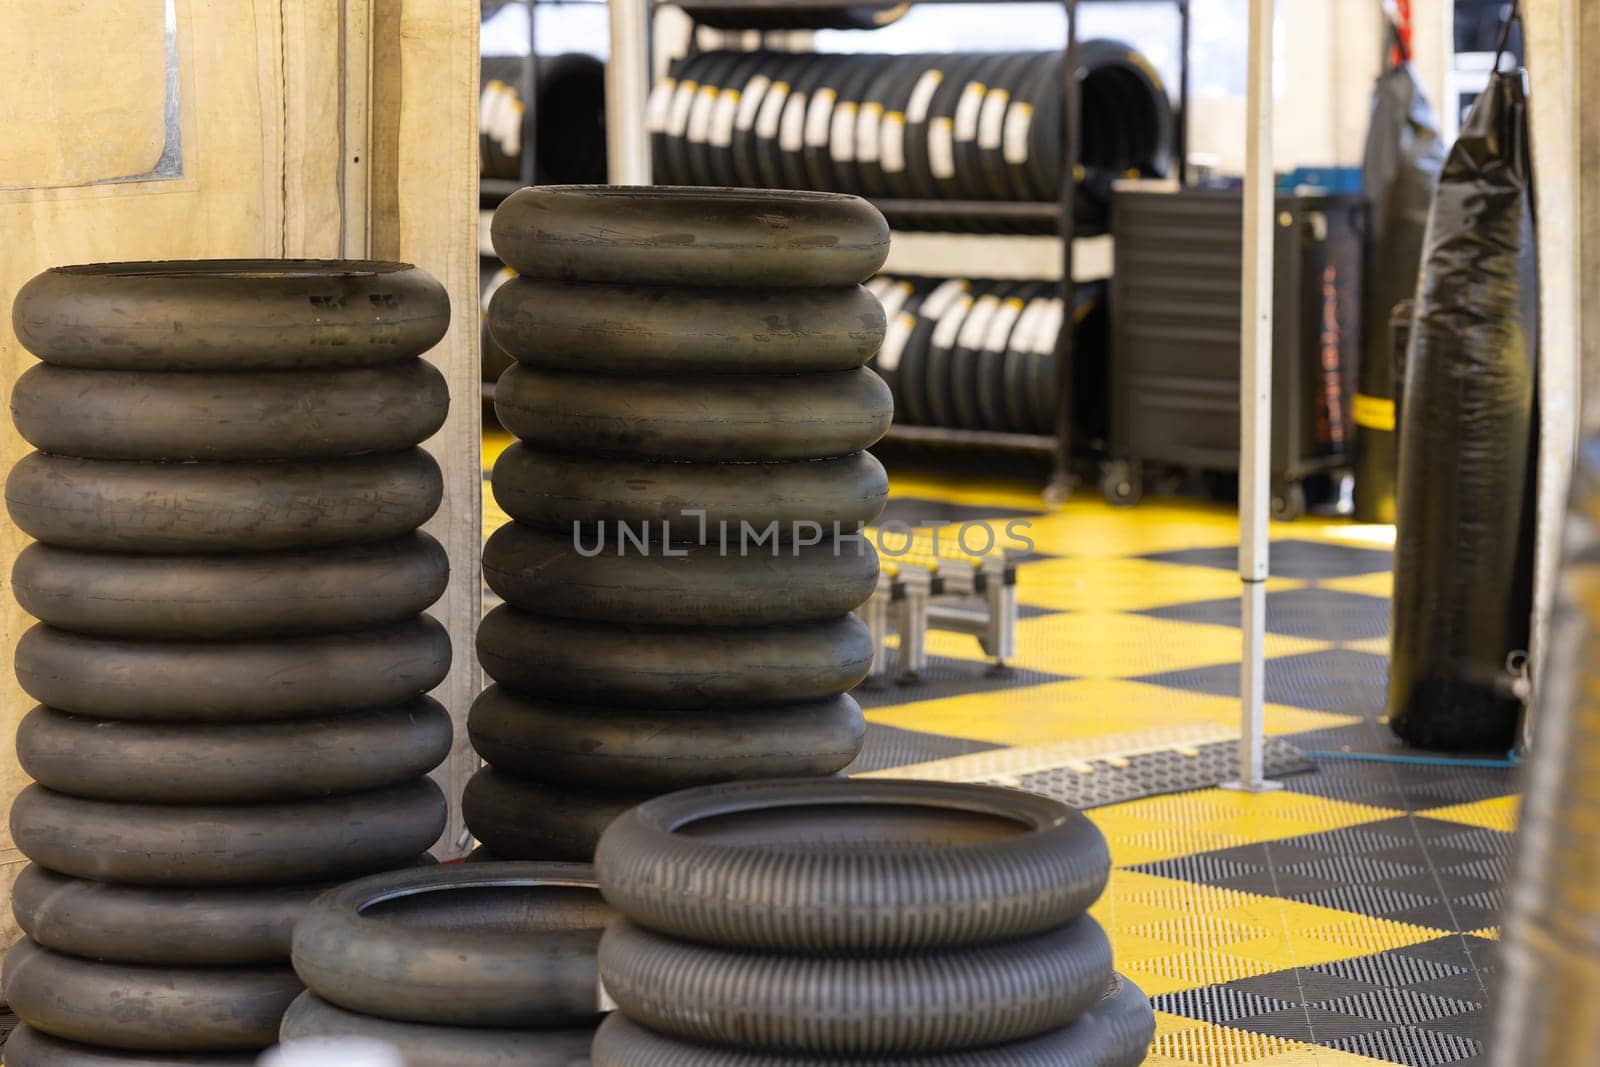 A pile of tires sitting on top of a checkered floor